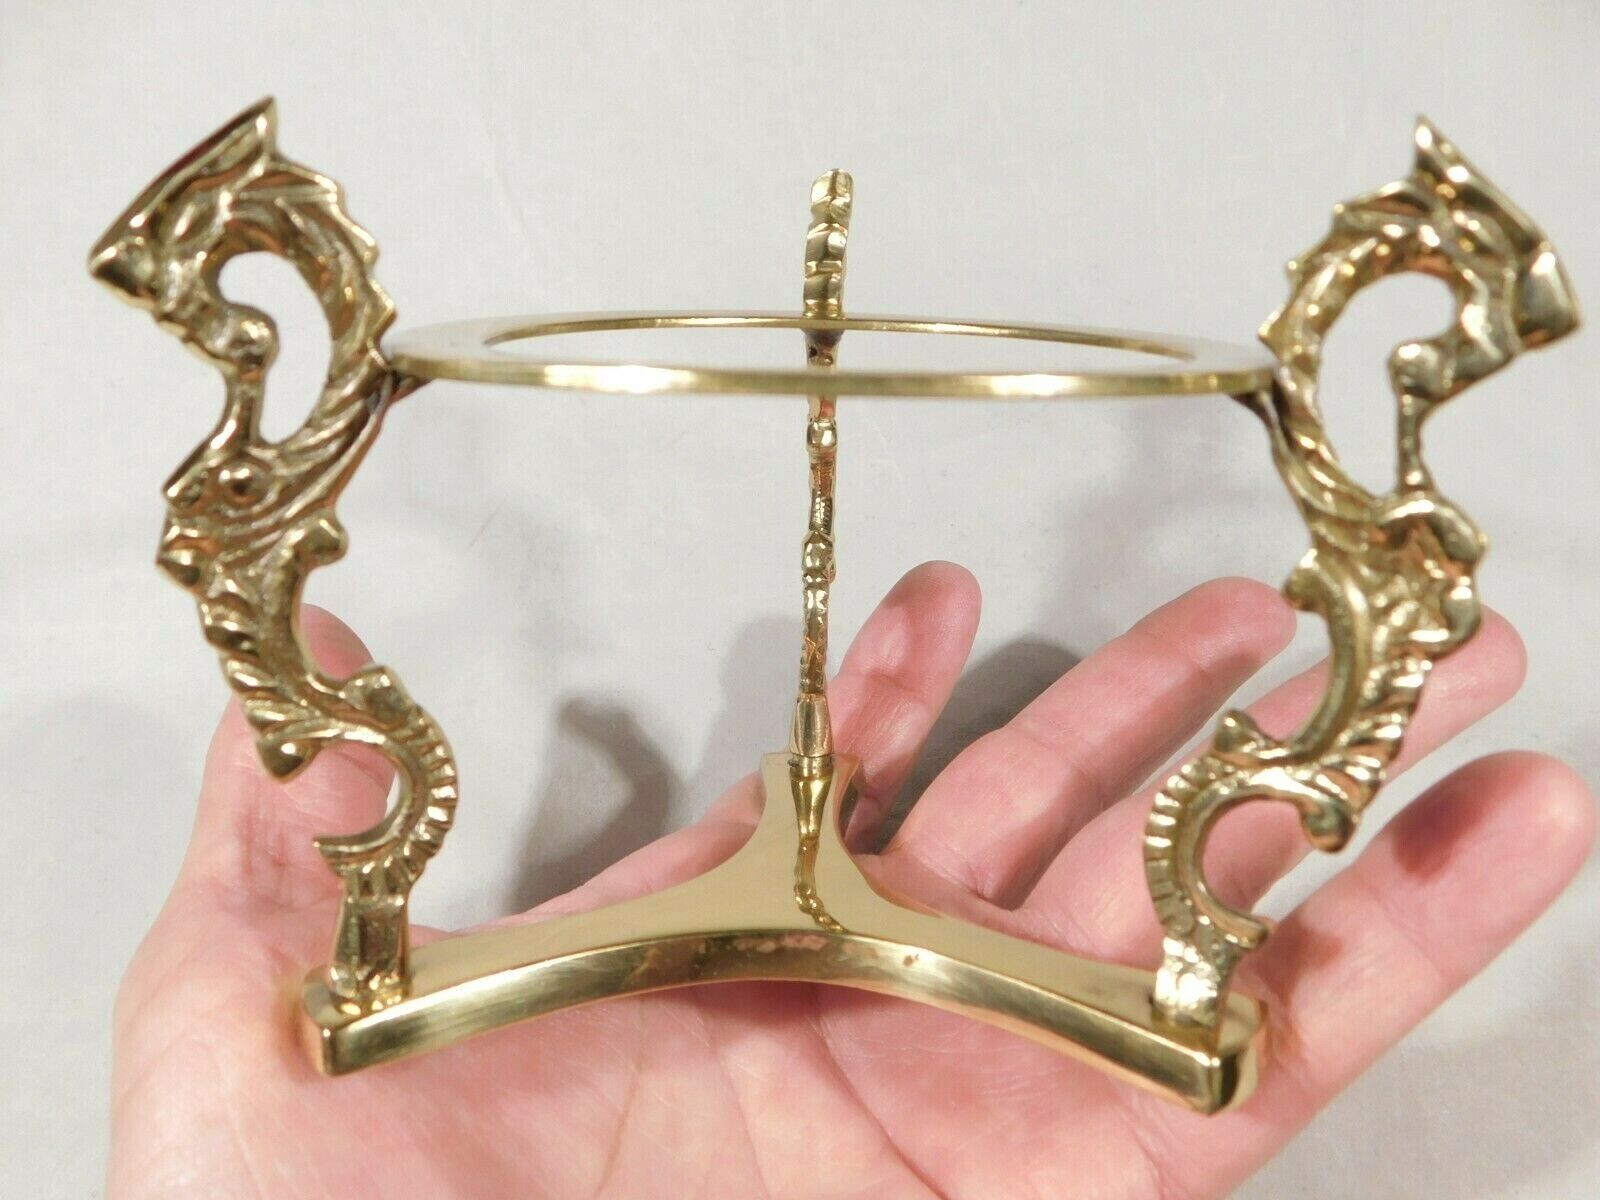 SPHERE Display Stand Large Size  Dragon Design Solid Brass